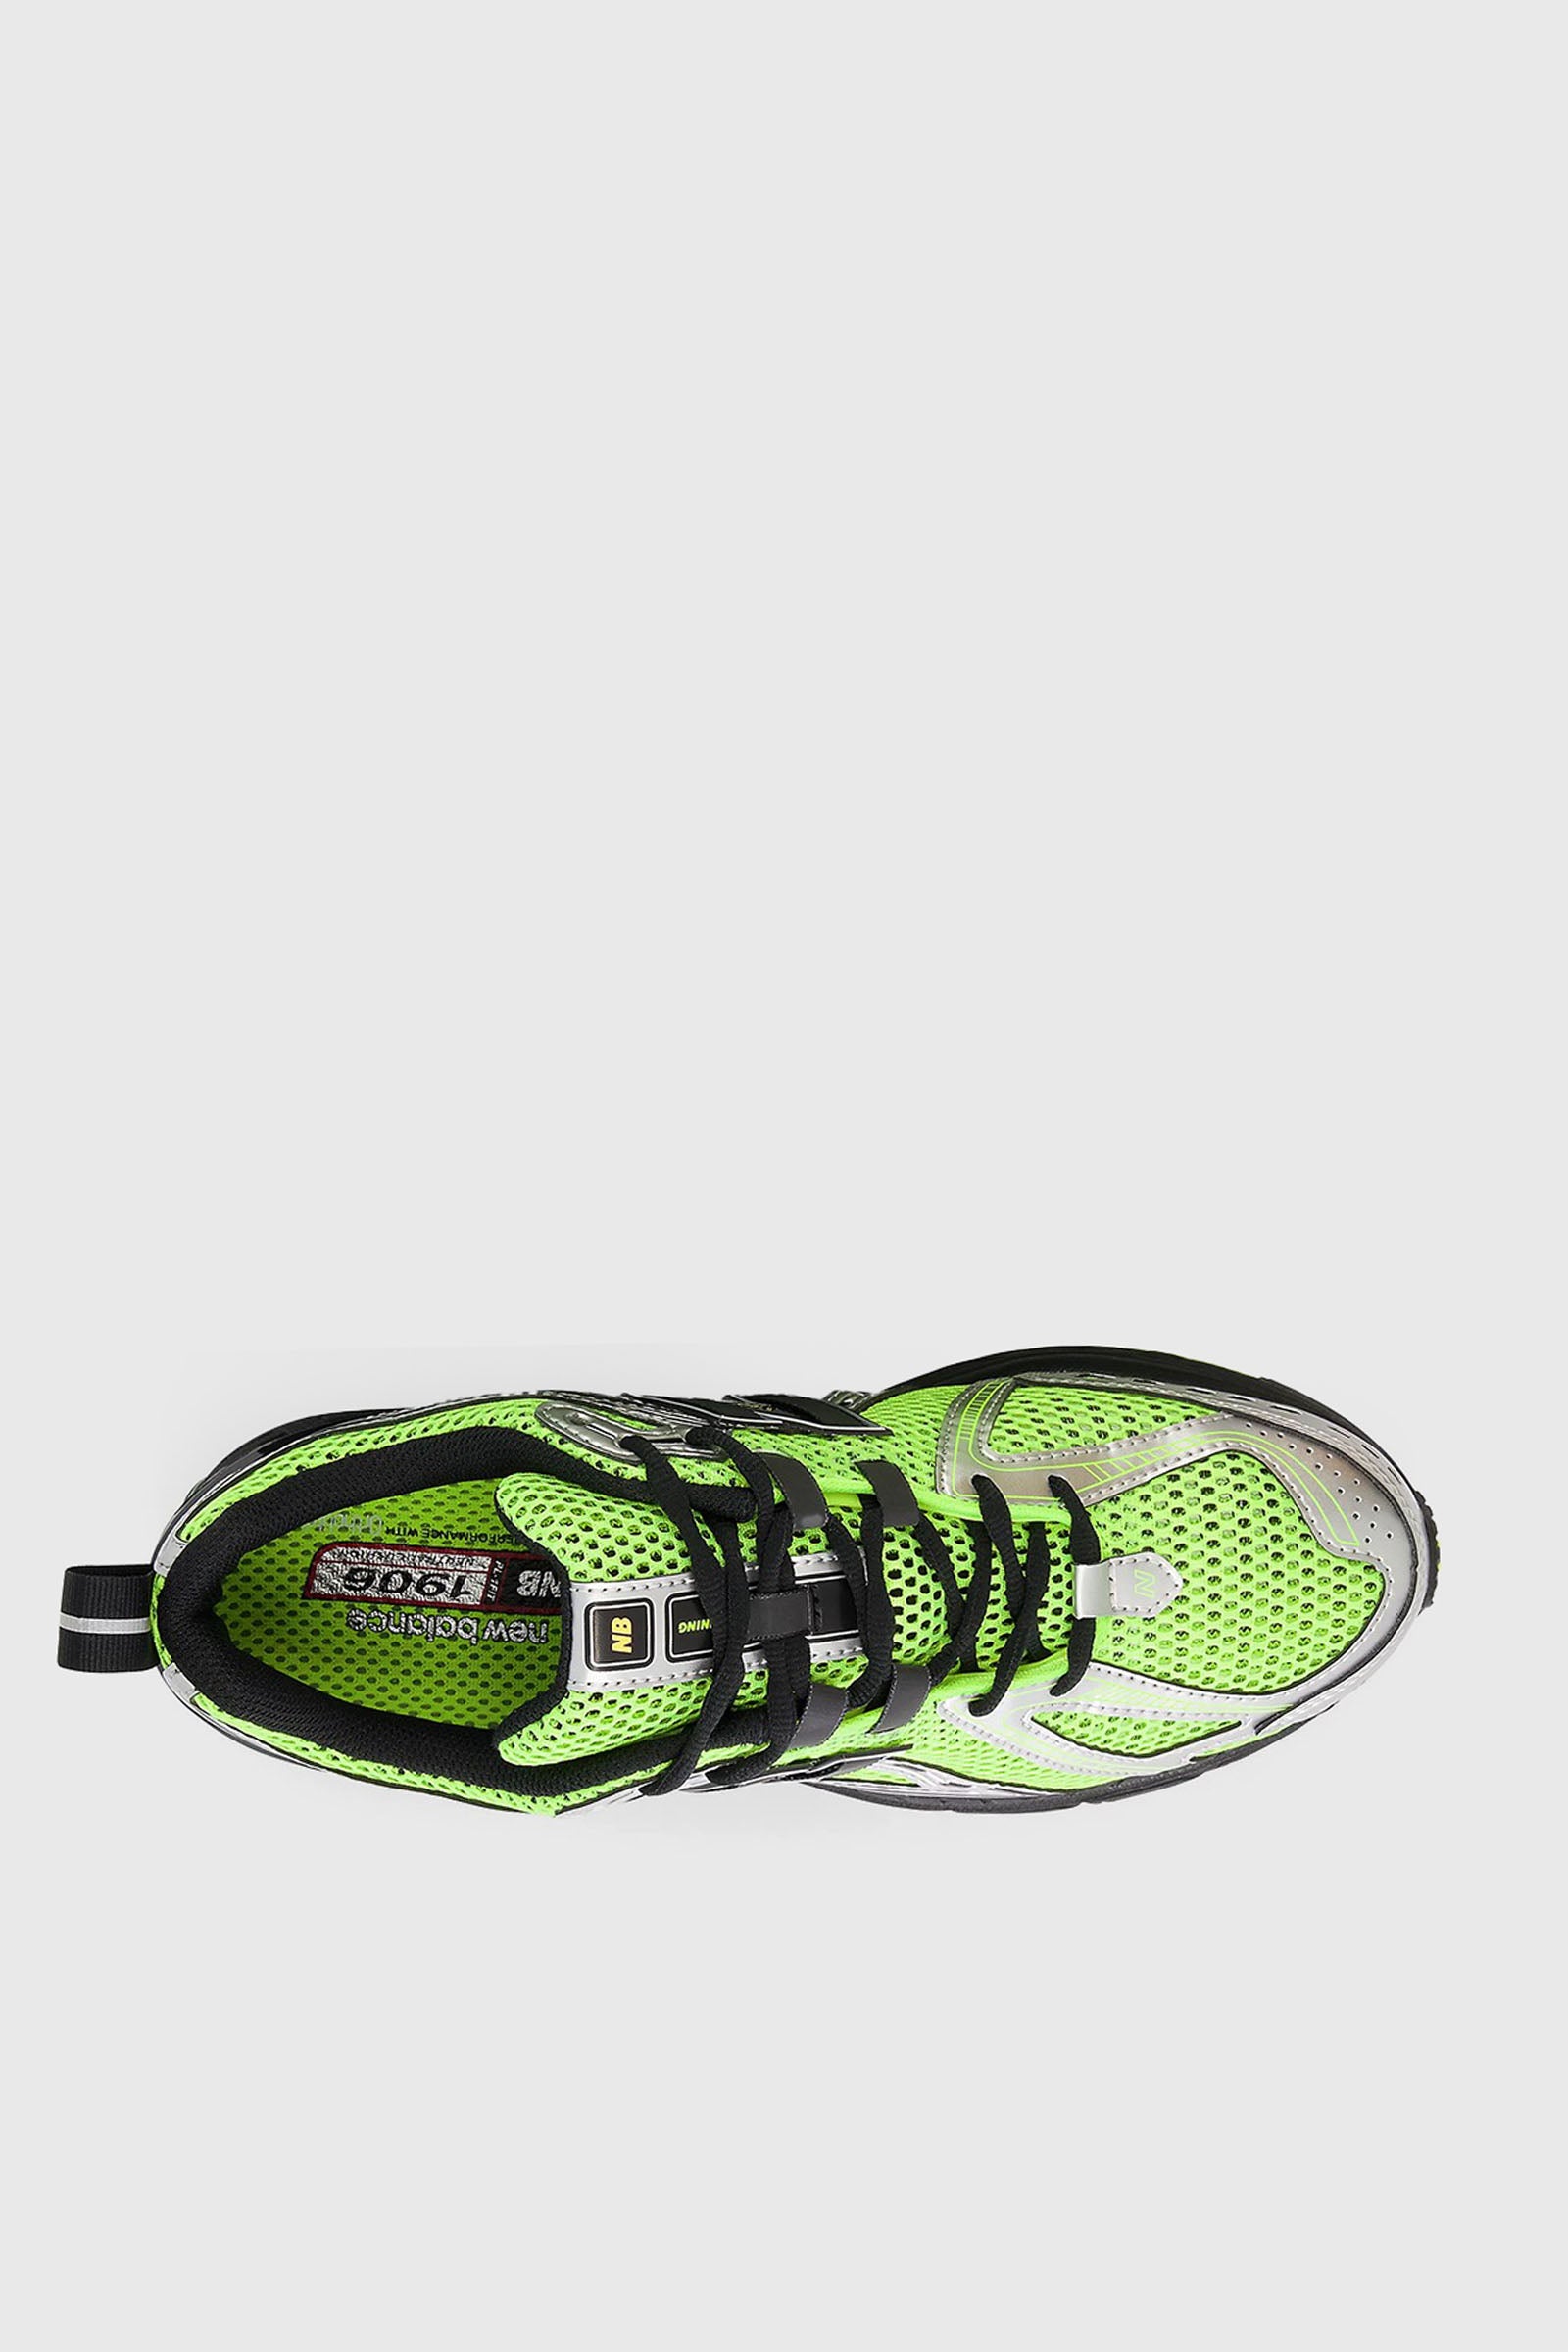 New Balance Sneaker Neon Green Synthetic - 4